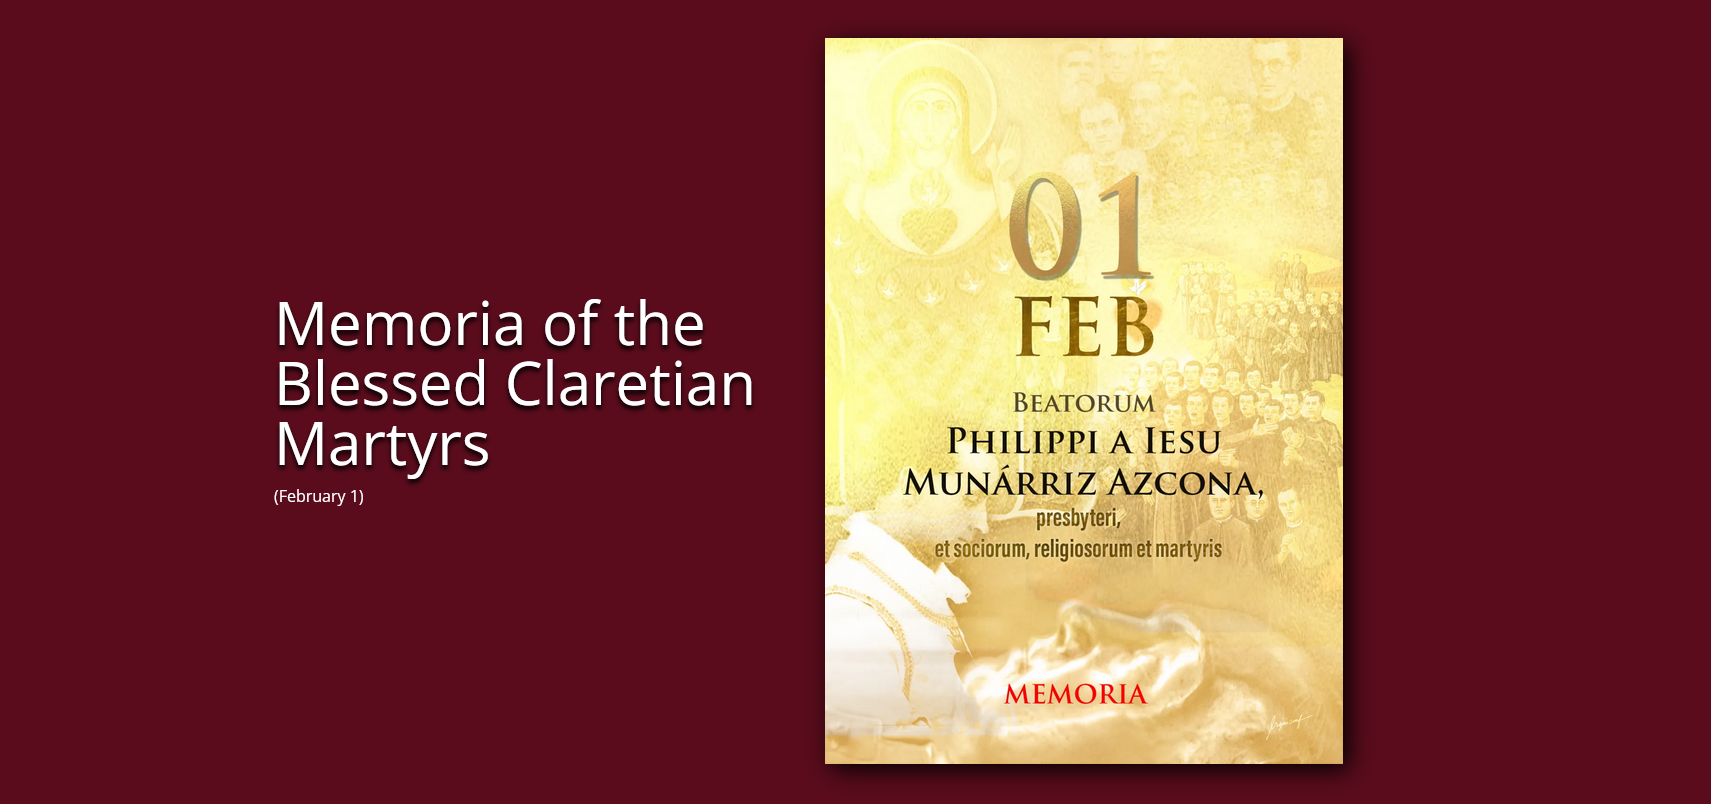 Witnesses Rooted in Christ and Boldness in Mission (Message for the Memorial of the Blessed Claretian Martyrs – 1 February)